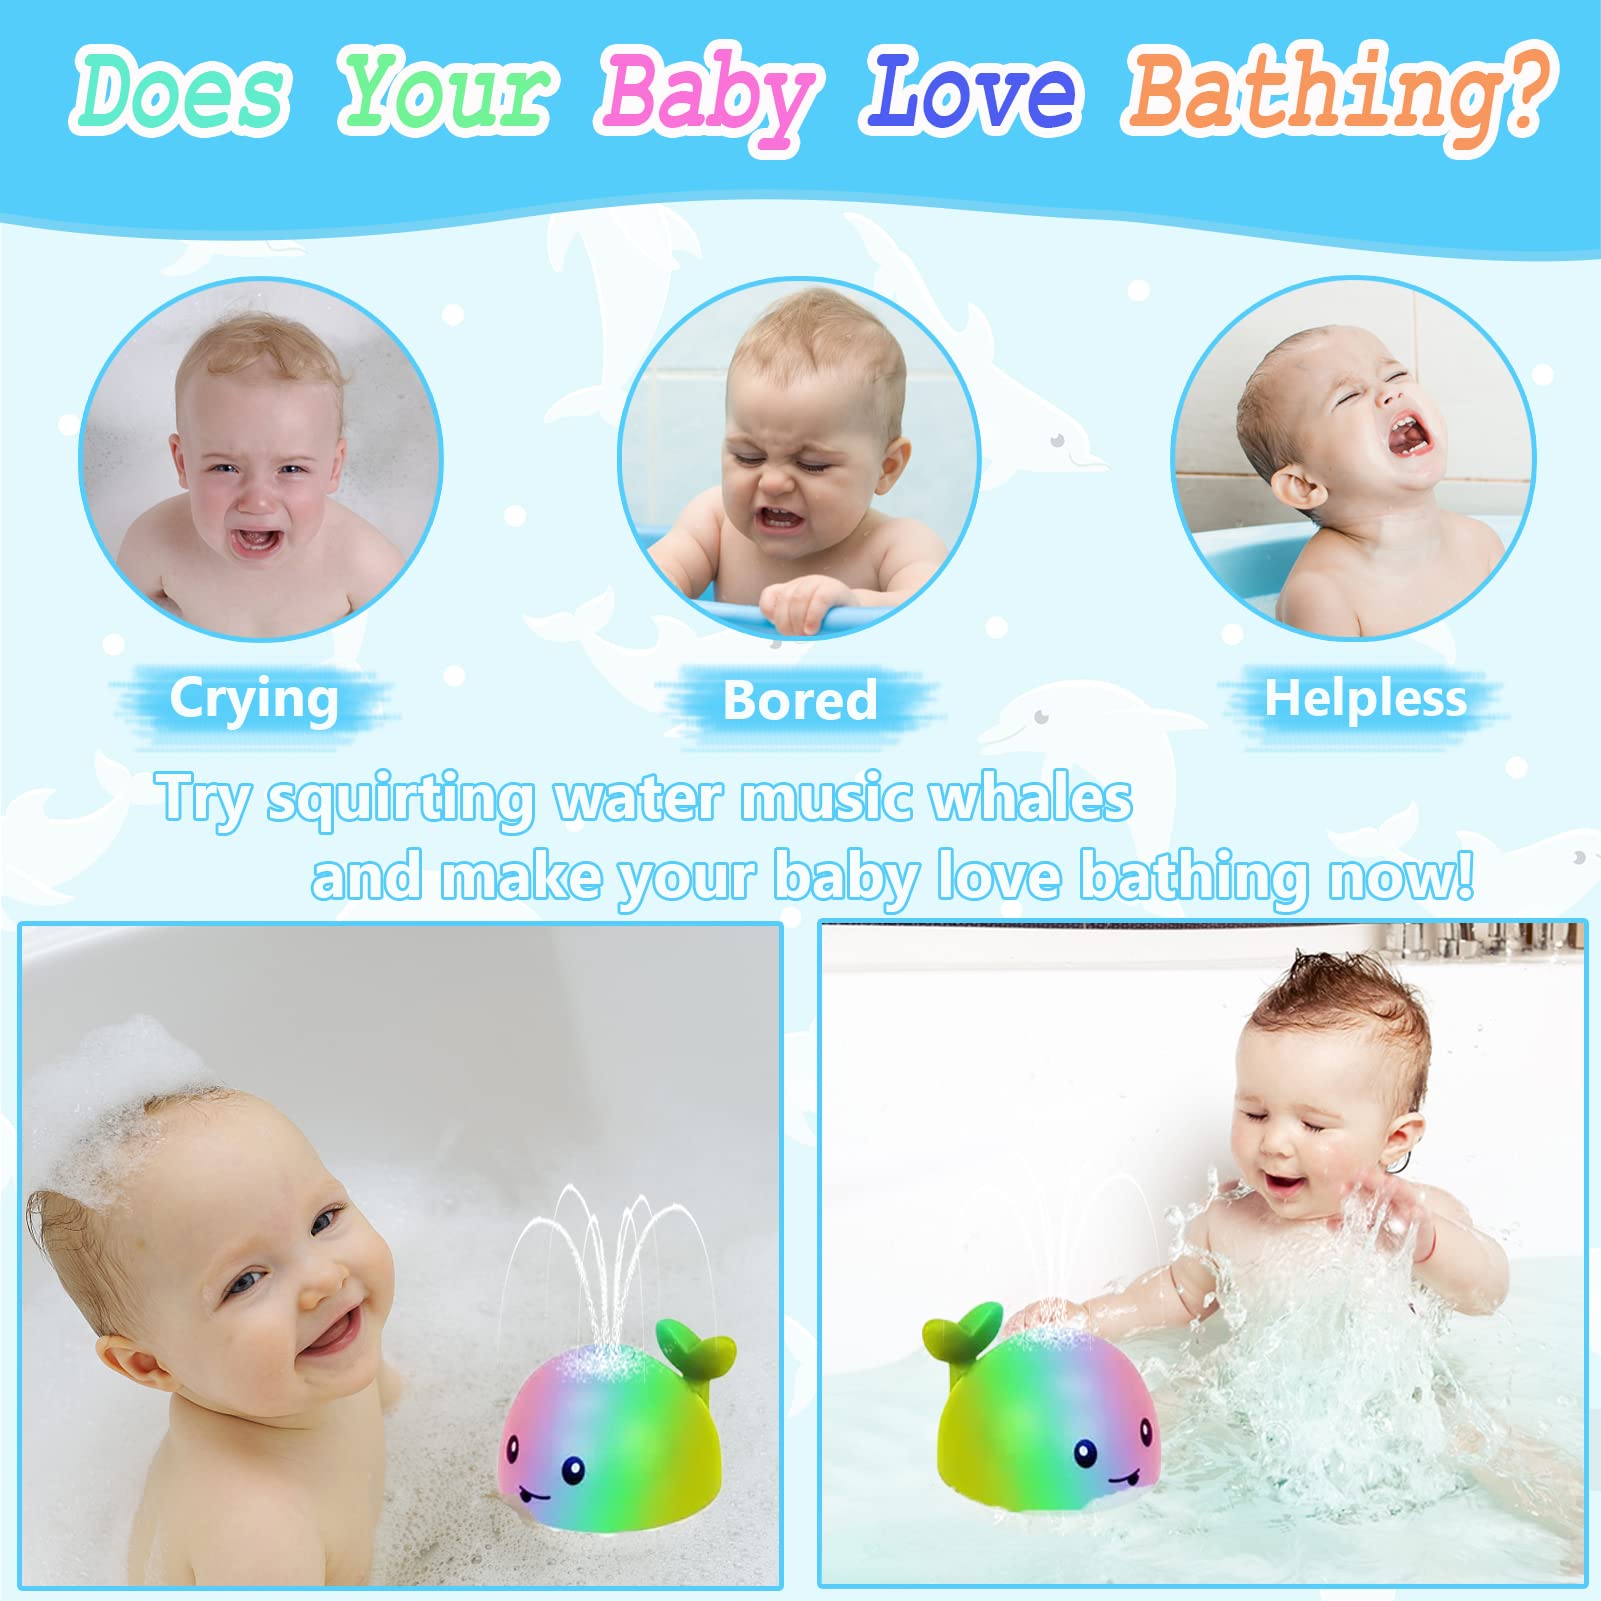 Bath Toys For Toddlers 1-3-Whale Bath Toy Sprinkler,Bath Toy For Infants 6-12 Months,Light Up Bath Toy For Toddlers Age 2-4 Induction Sprinkler Bathtub Shower Toys For Boys Girls Gift For Kids Age 1-6